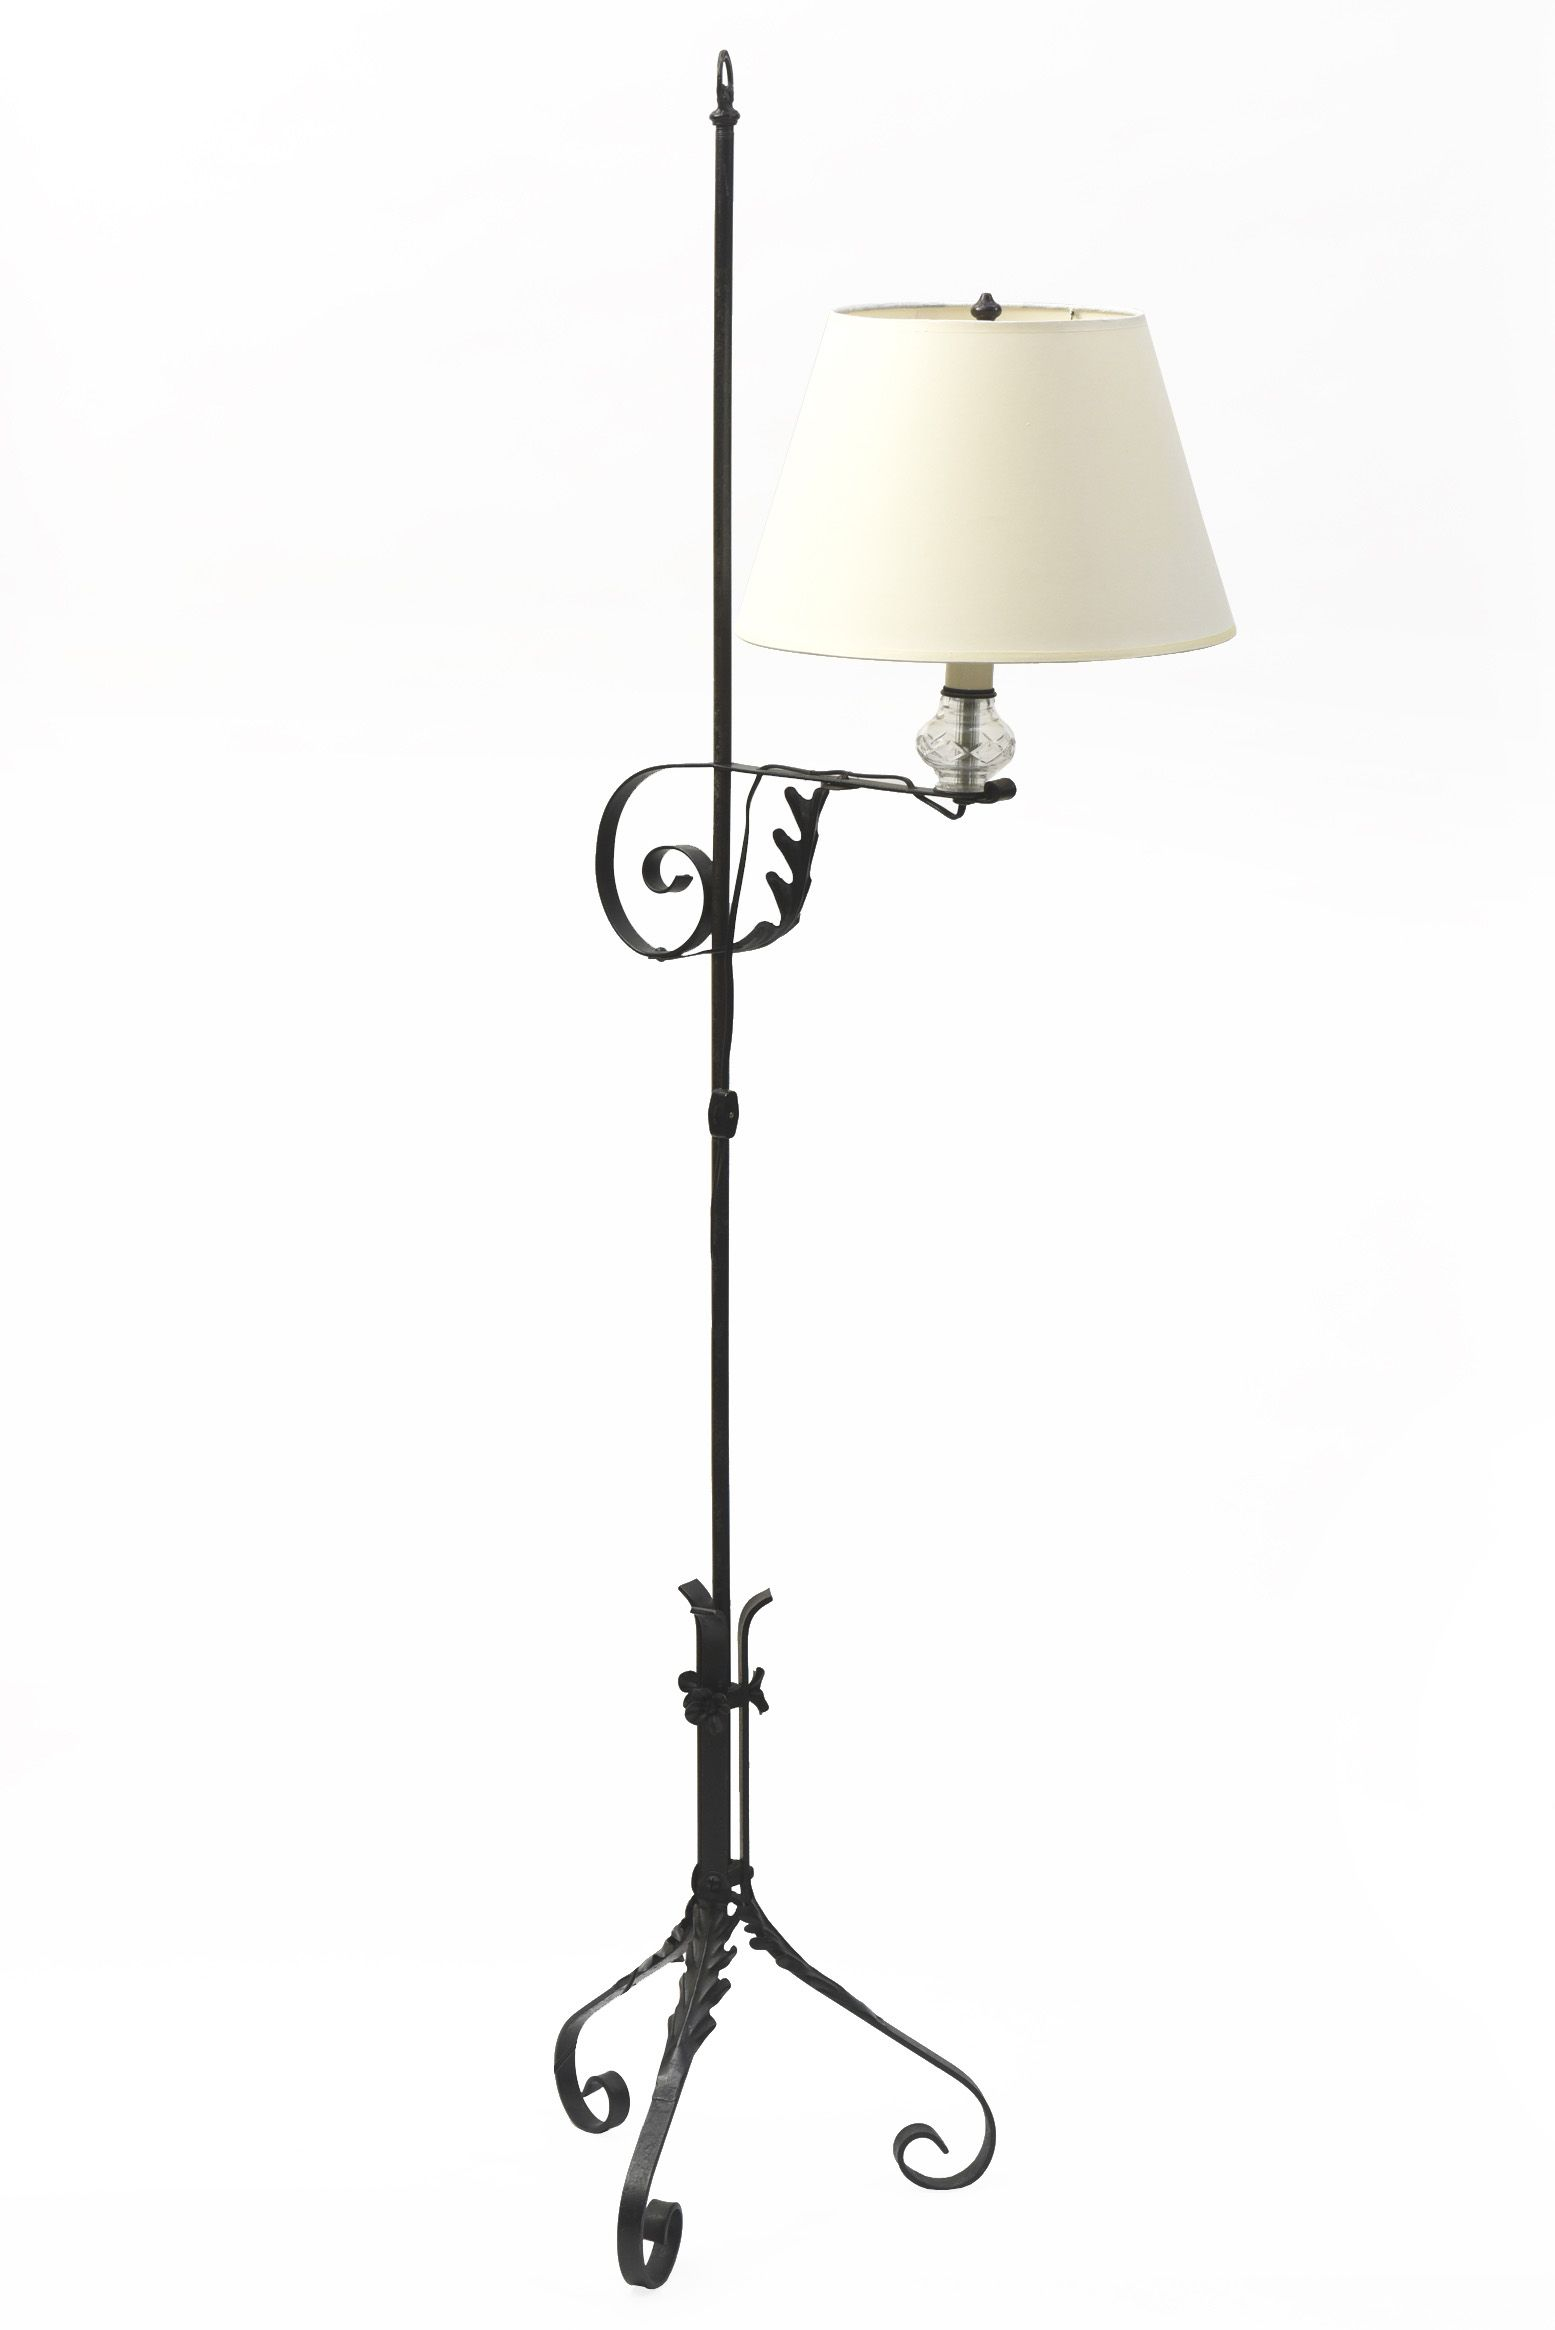 Wrought Iron Colonial Style Bridge Lamp Antique Lighting intended for proportions 1555 X 2330